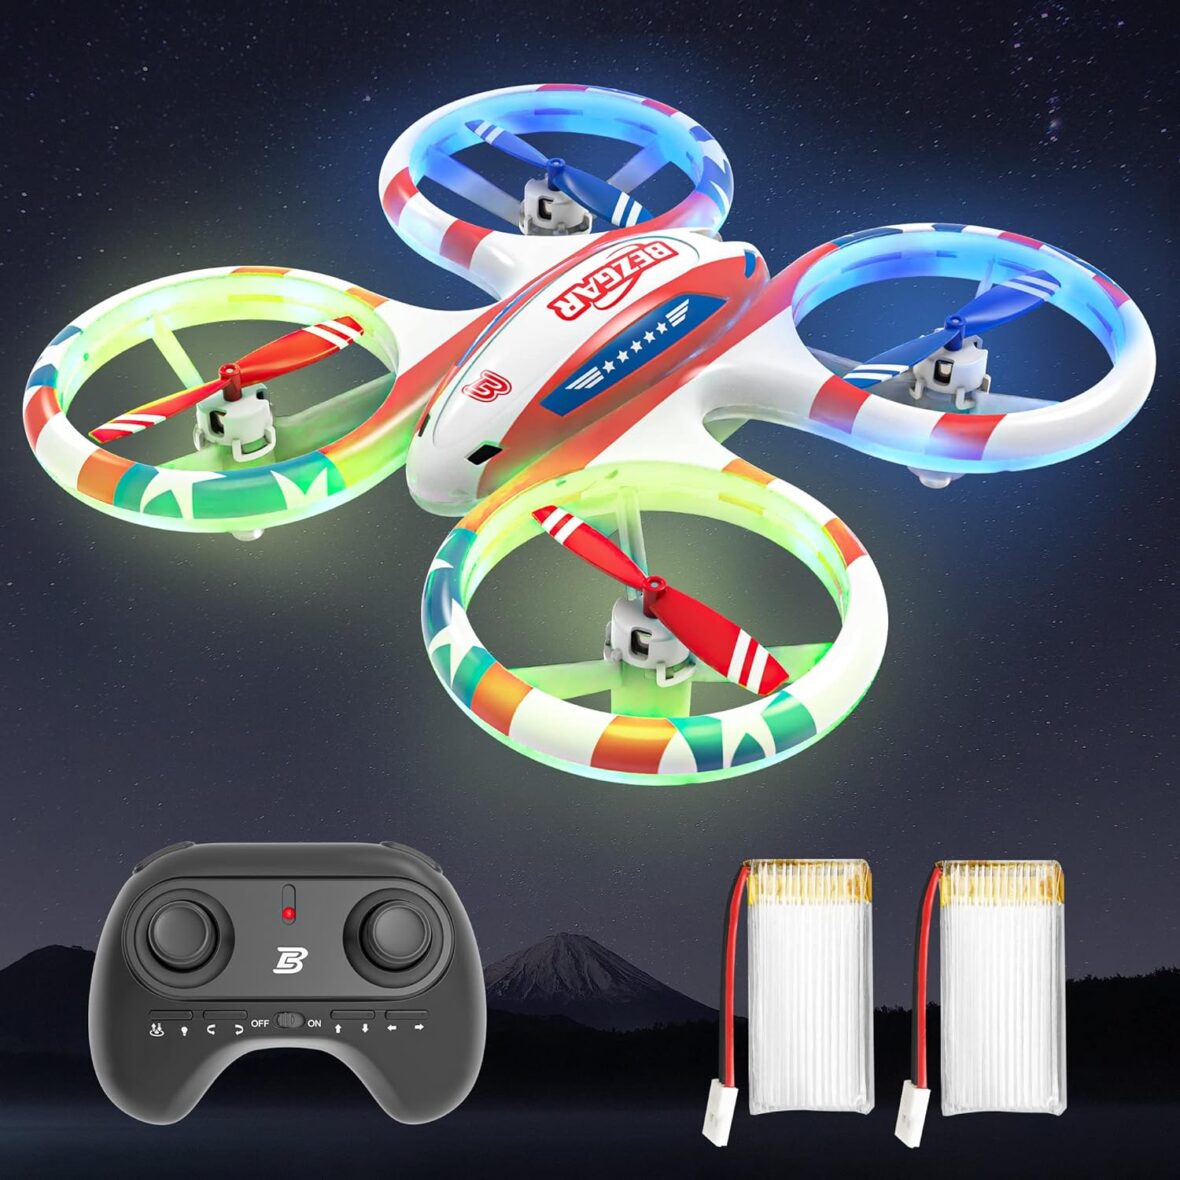 BEZGAR Drones for Kids – RC Drone Indoor, LED Remote Control Mini with 3D Flip and 3 Speed Propeller Full Protect Small Quadcopter Beginners, Easy to fly Gifts Blue-white